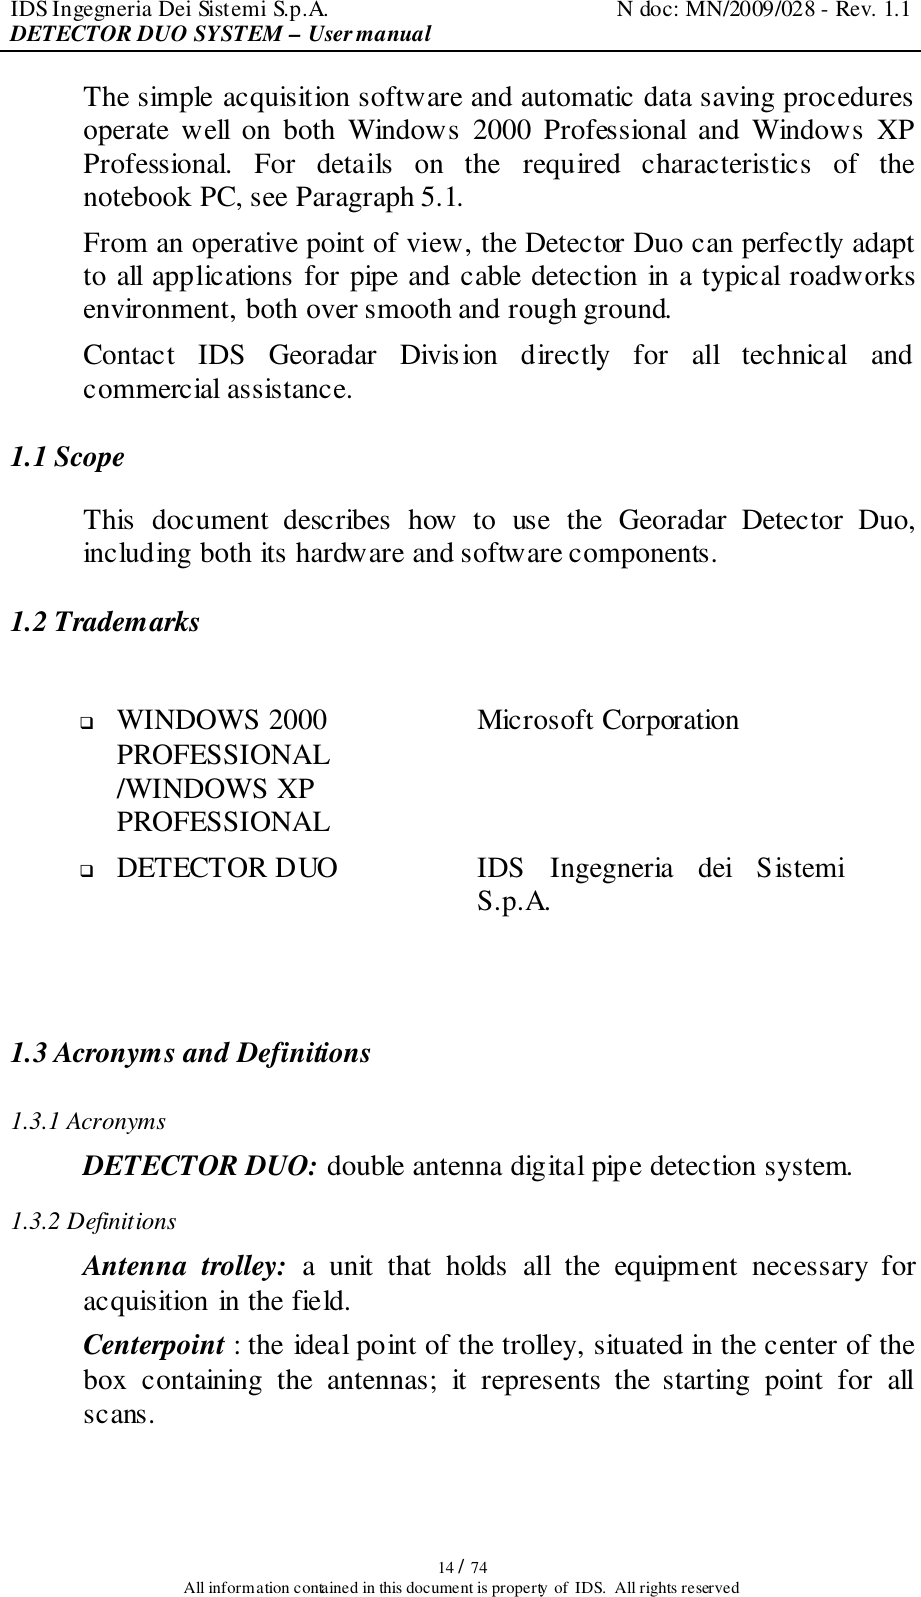 IDS Ingegneria Dei Sistemi S.p.A.  N doc: MN/2009/028 - Rev. 1.1 DETECTOR DUO SYSTEM – User manual   14 / 74 All information contained in this document is property of  IDS.  All rights reserved The simple acquisition software and automatic data saving procedures operate  well  on  both  Windows  2000  Professional  and  Windows  XP Professional.  For  details  on  the  required  characteristics  of  the notebook PC, see Paragraph 5.1. From an operative point of view, the Detector Duo can perfectly adapt to all applications for pipe and cable detection in a typical roadworks environment, both over smooth and rough ground.  Contact  IDS  Georadar  Division  directly  for  all  technical  and commercial assistance.  1.1 Scope This  document  describes  how  to  use  the  Georadar  Detector  Duo, including both its hardware and software components. 1.2 Trademarks   WINDOWS 2000 PROFESSIONAL /WINDOWS XP PROFESSIONAL Microsoft Corporation  DETECTOR DUO IDS  Ingegneria  dei  Sistemi S.p.A.  1.3 Acronyms and Definitions 1.3.1 Acronyms DETECTOR DUO: double antenna digital pipe detection system. 1.3.2 Definitions Antenna  trolley:  a  unit  that  holds  all  the  equipment  necessary  for acquisition in the field.  Centerpoint : the ideal point of the trolley, situated in the center of the box  containing  the  antennas;  it  represents  the  starting  point  for  all scans. 